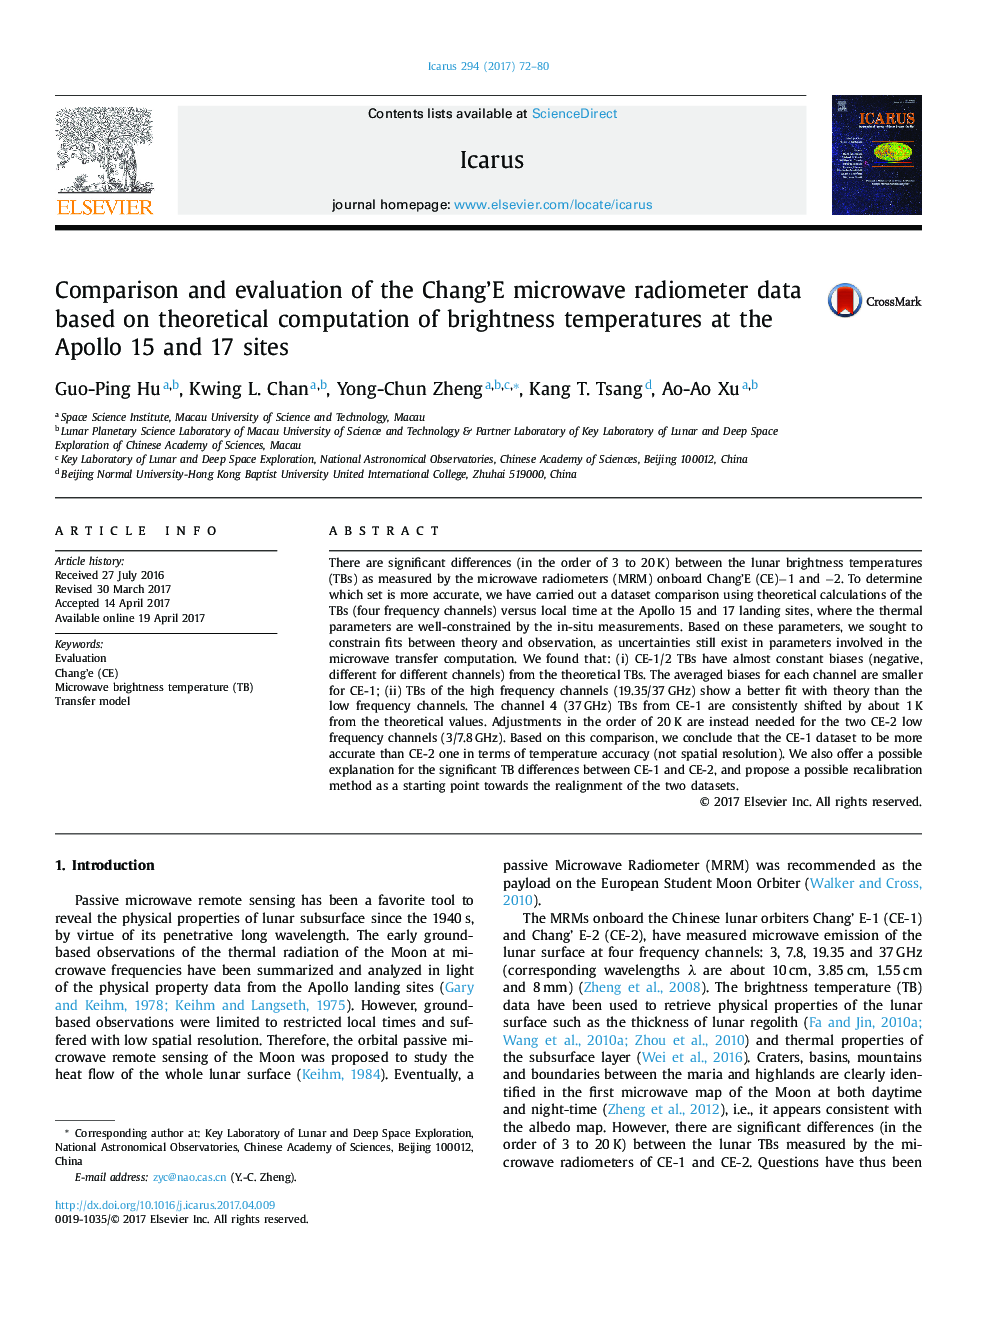 Comparison and evaluation of the Chang'E microwave radiometer data based on theoretical computation of brightness temperatures at the Apollo 15 and 17 sites